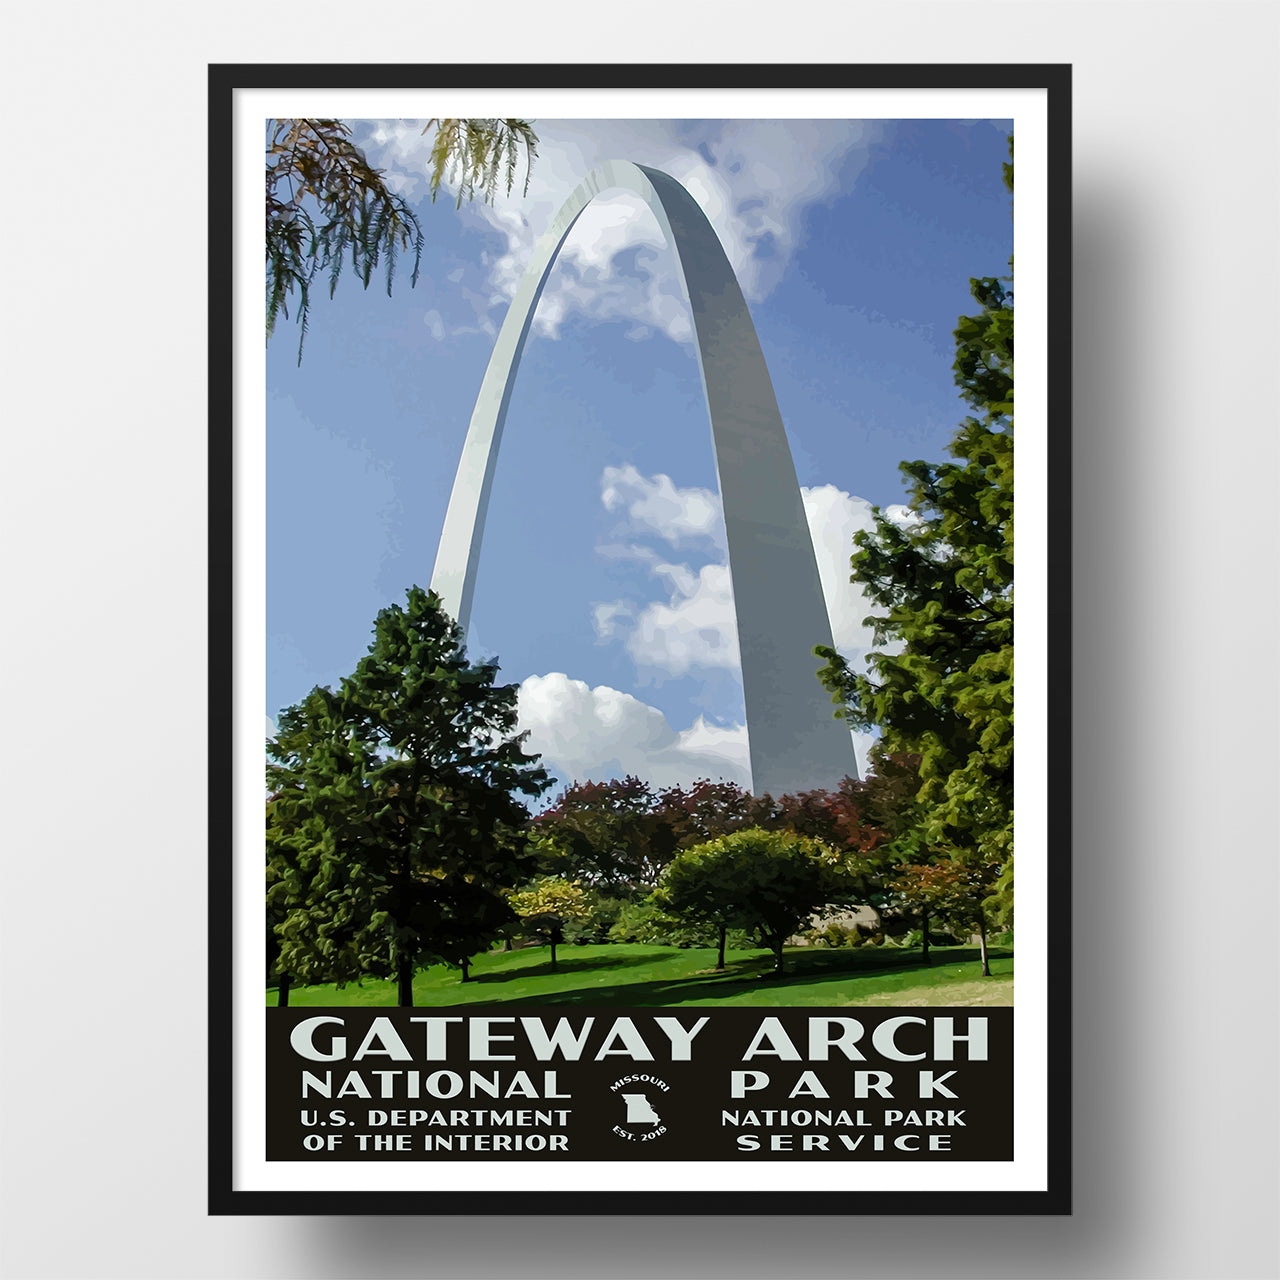 Gateway Arch National Park Poster